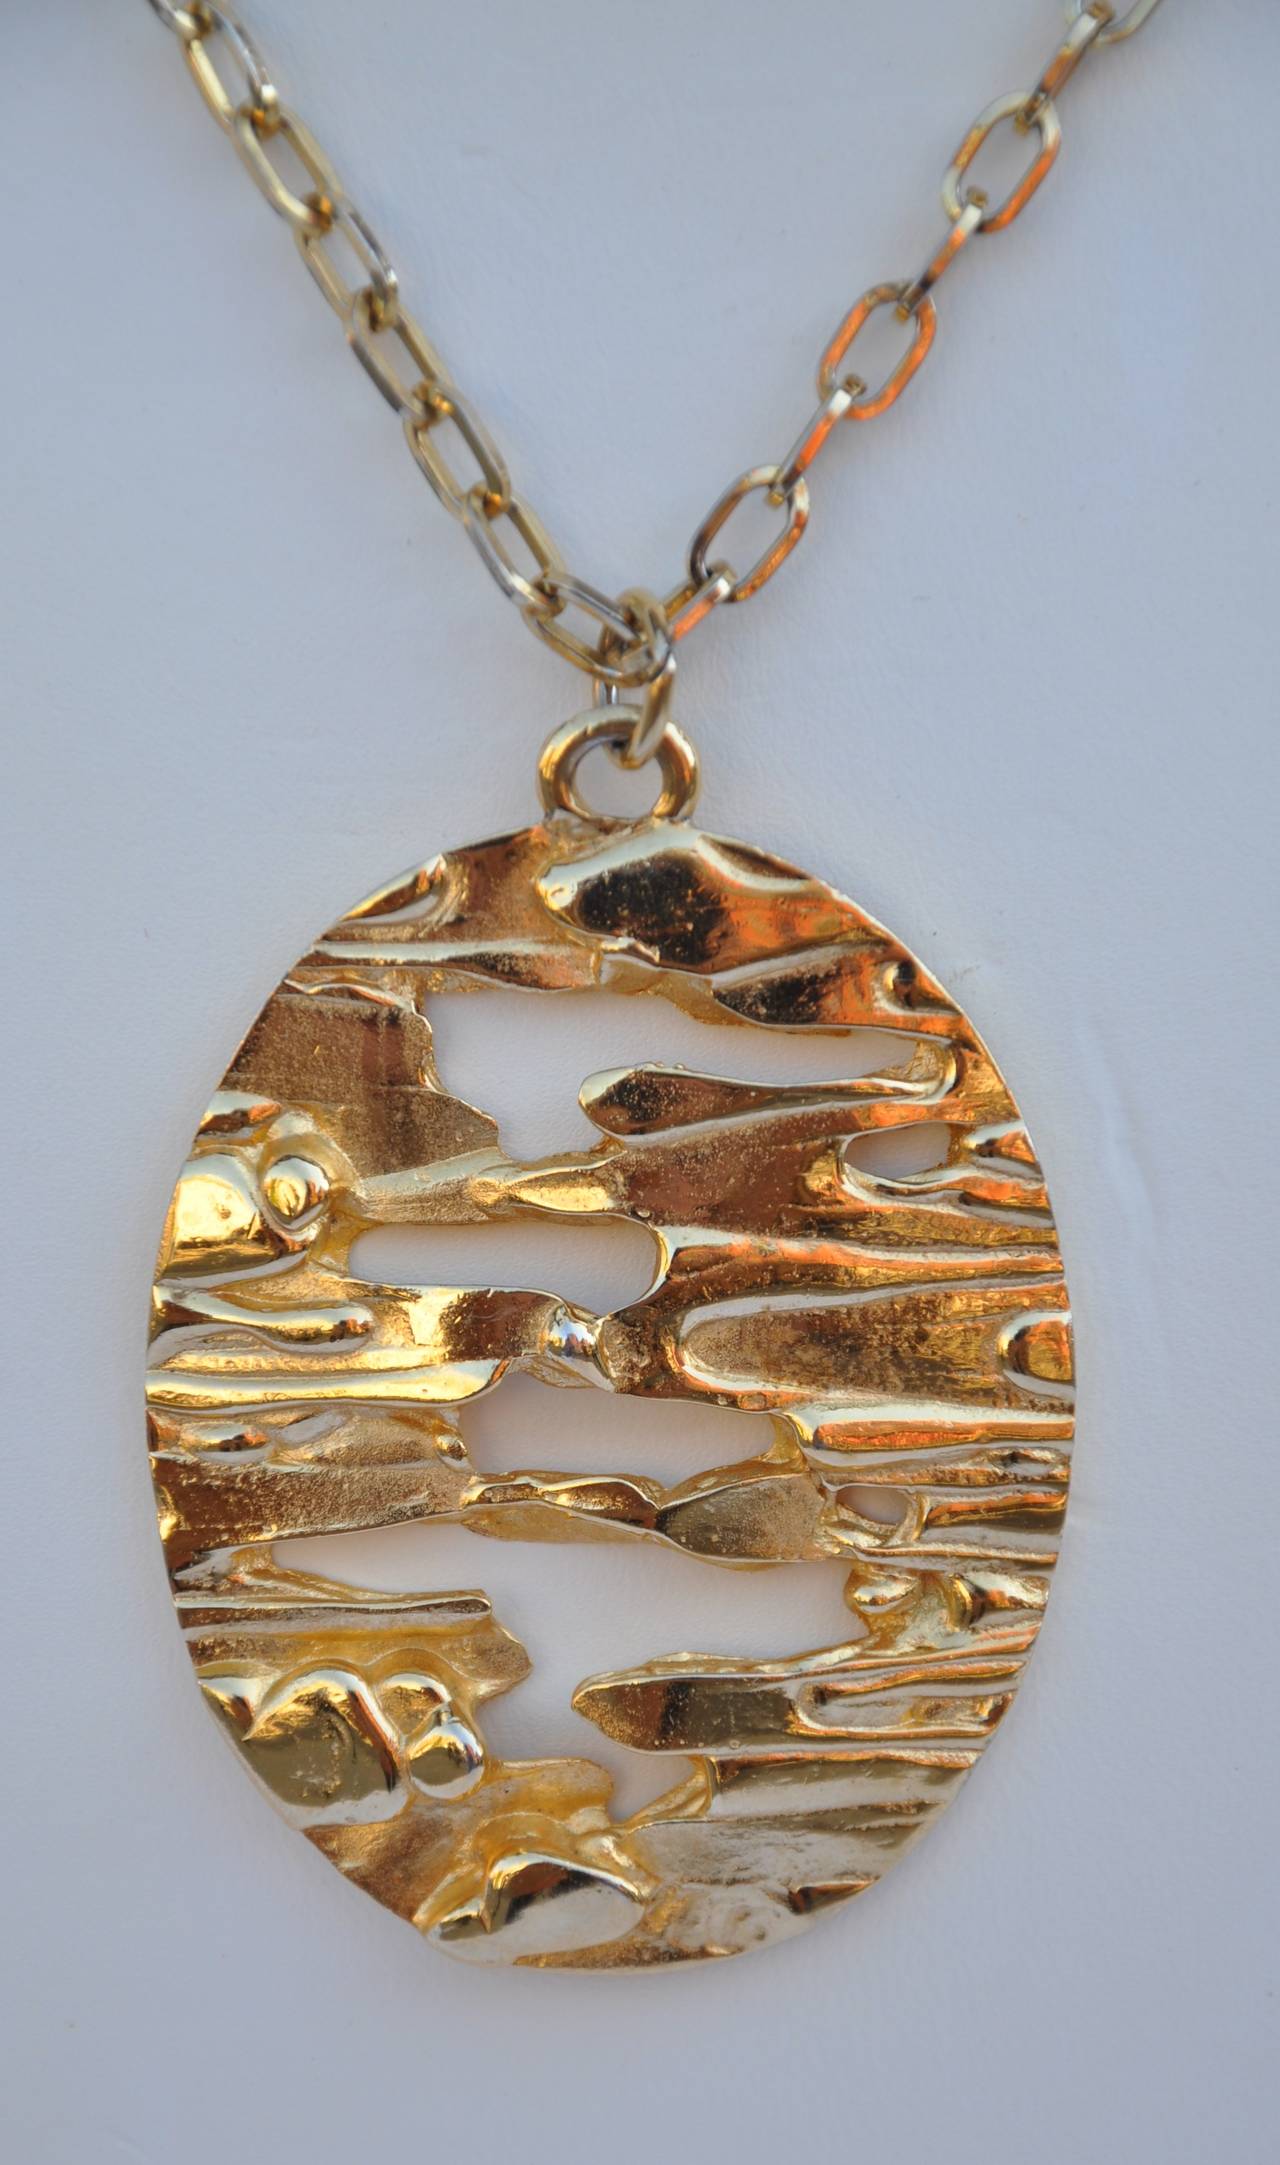         This wonderful huge Trifari gilded gold vermeil finish whimsical bold abstract pendant measures 1 6/8" in length, 2 3/8" in height and 2/8" in depth. The necklace measures 24" in total length. The pendant is signed on the